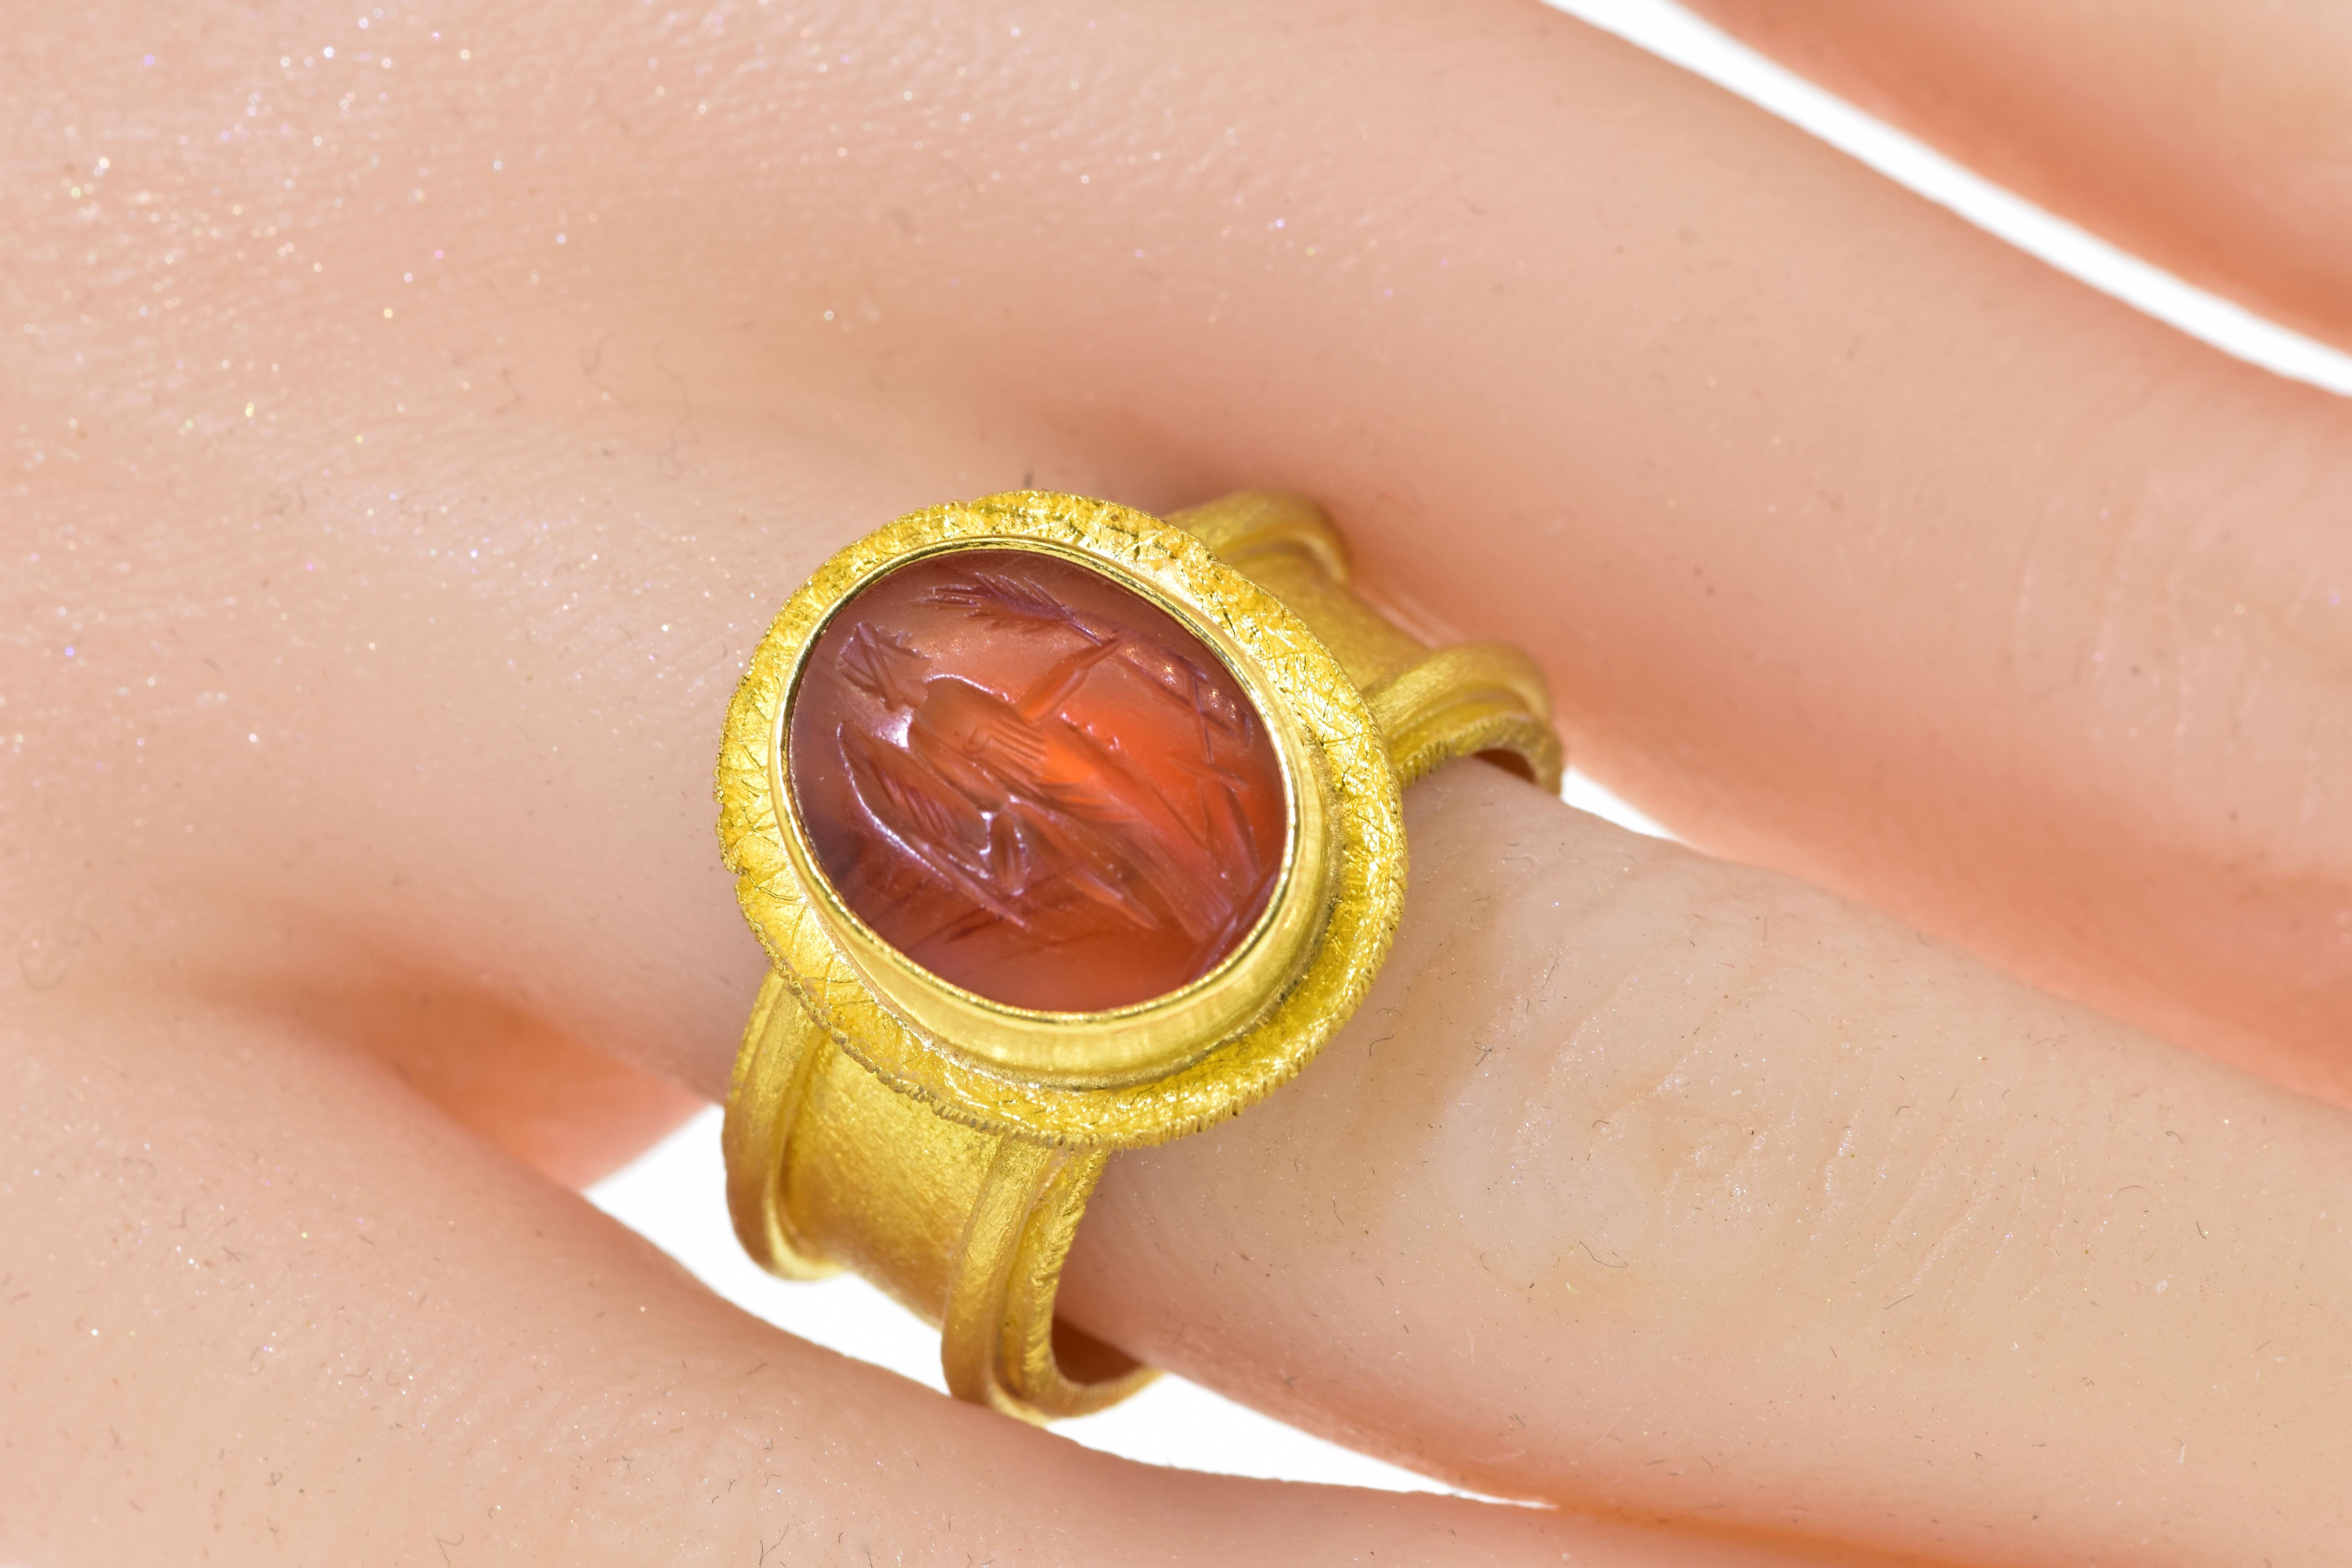 22K Yellow Gold Ring Centering an Antique Intaglio, Fairchild & Co. In Excellent Condition For Sale In Aspen, CO